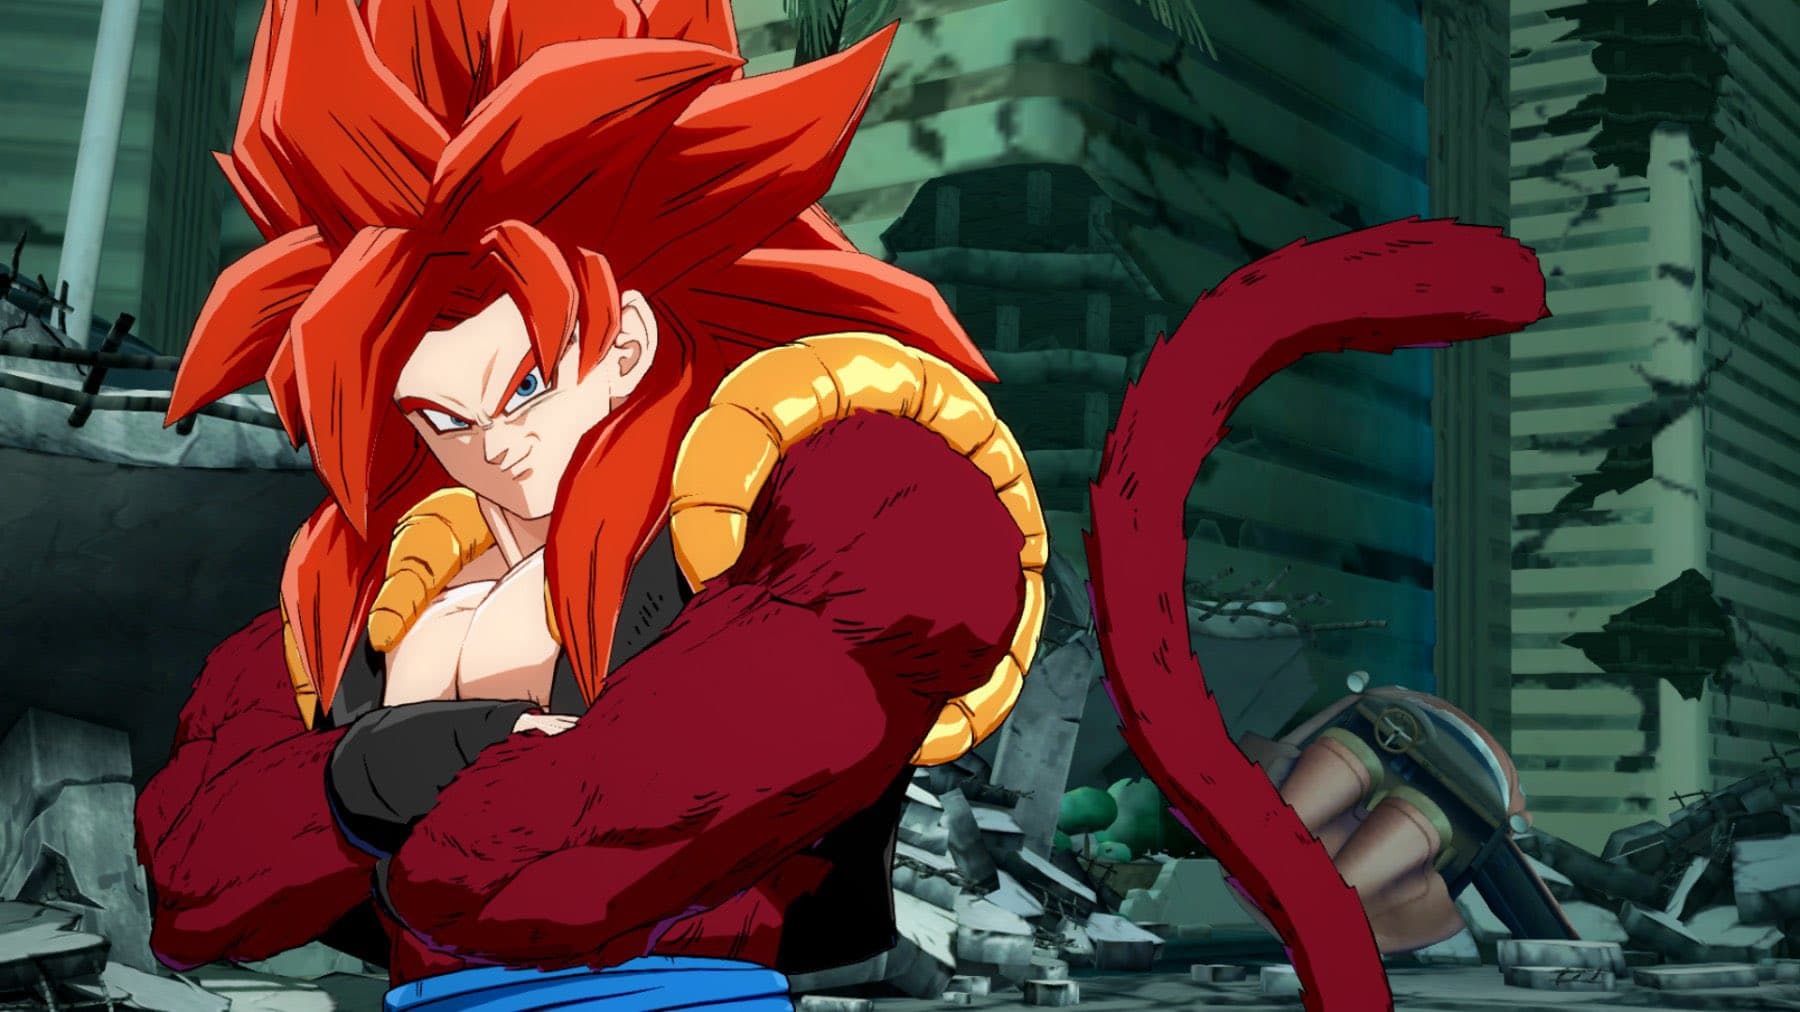 this is the first character of season 4 for FighterZ